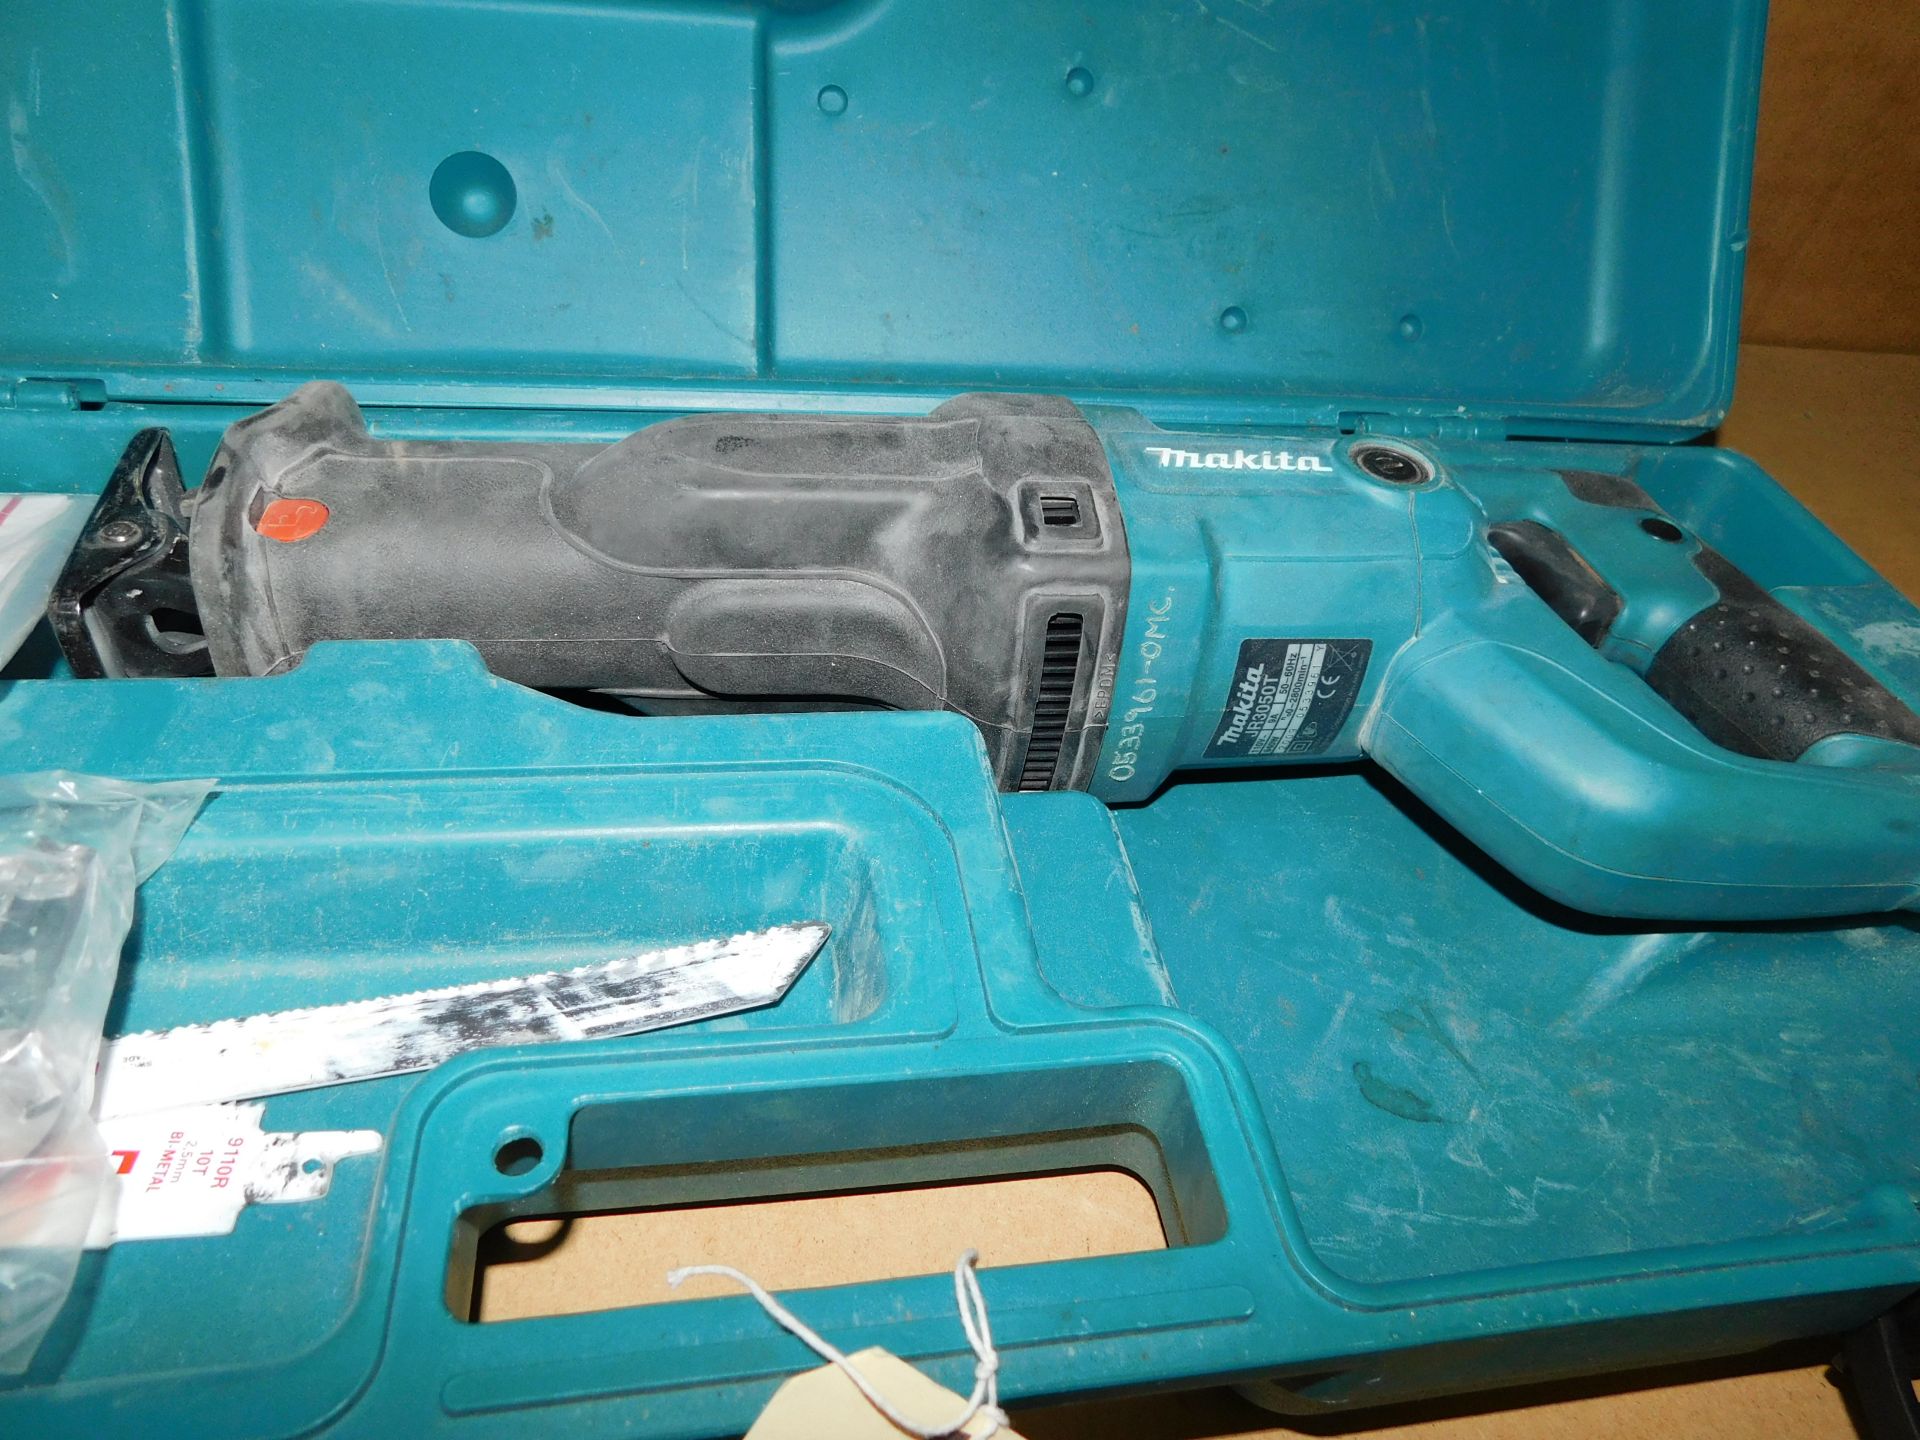 Makita JR3050T Reciprocating Saw, 110v (Location: Stockport. Please Refer to General Notes) - Image 3 of 4